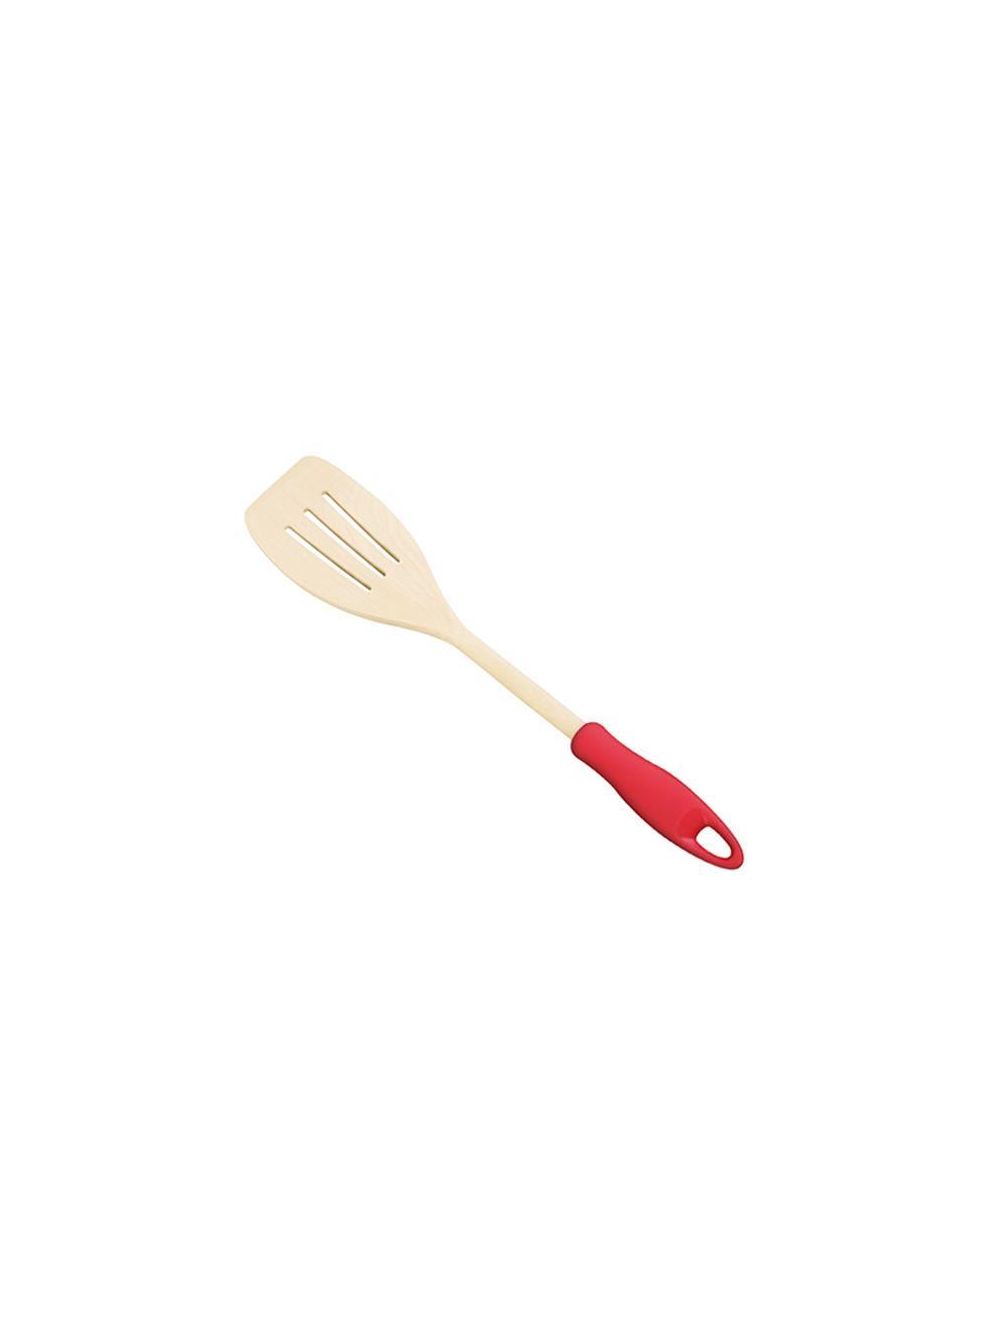 Tescoma Slotted Turner Wood - Assorted Colour